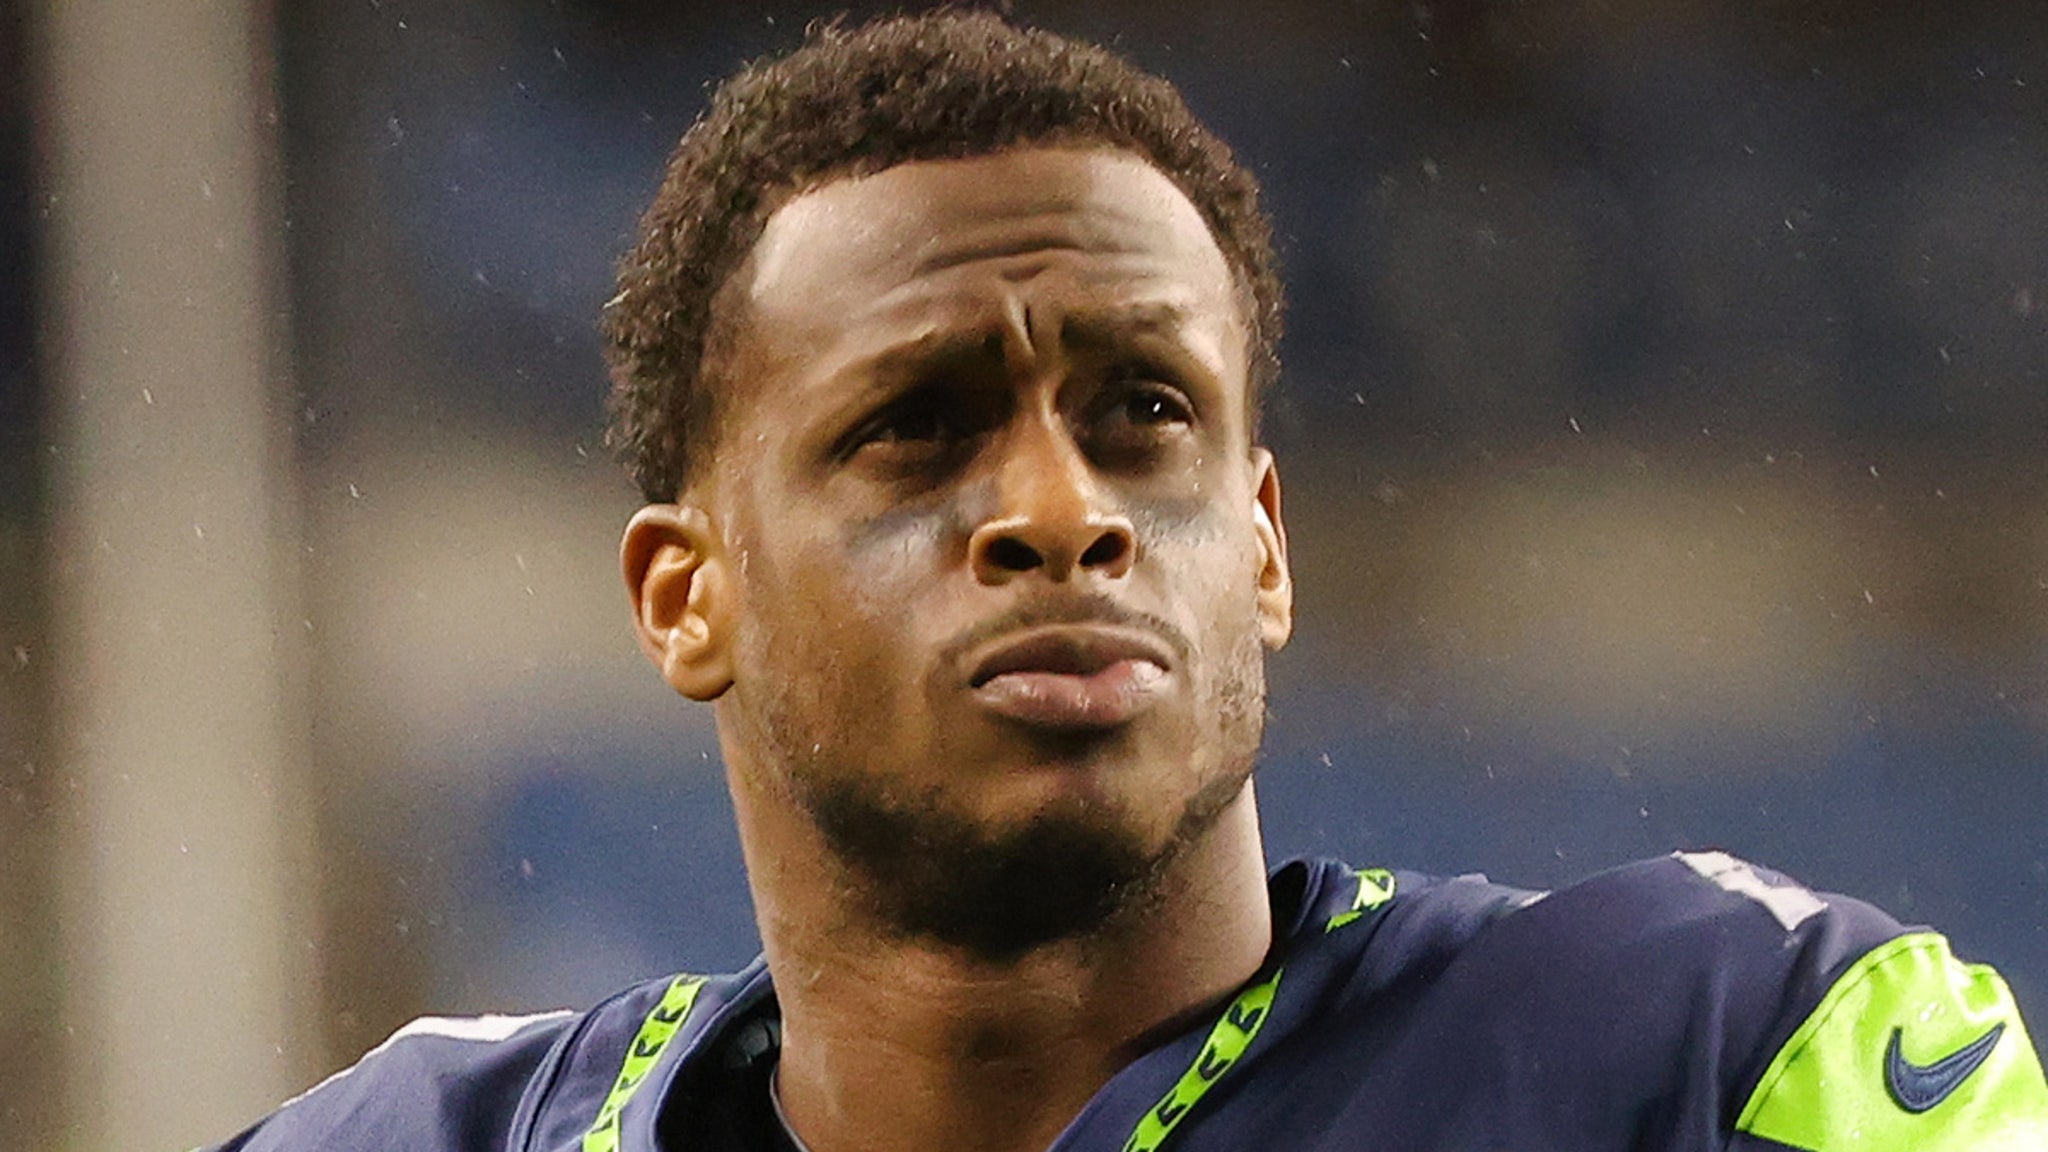 Geno Smith Allegedly Told Officer He Had ‘A Little D**k’ & Threatened Cops During Arrest